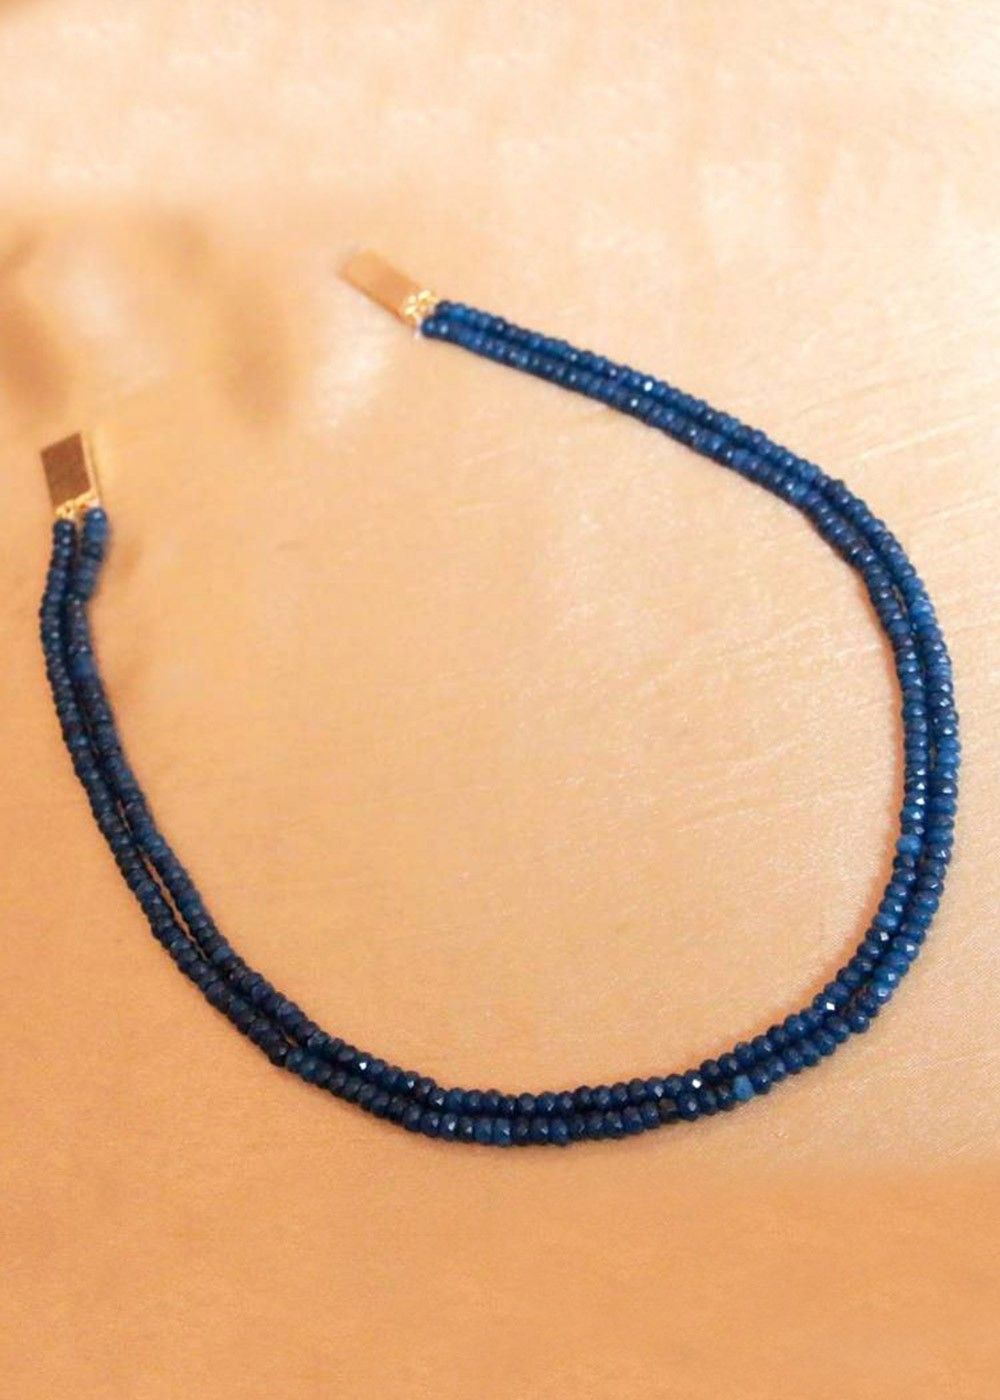 Natural Blue Sapphire Beads 1166cts Necklace at Rs 80/carat in Jaipur | ID:  2851121027155